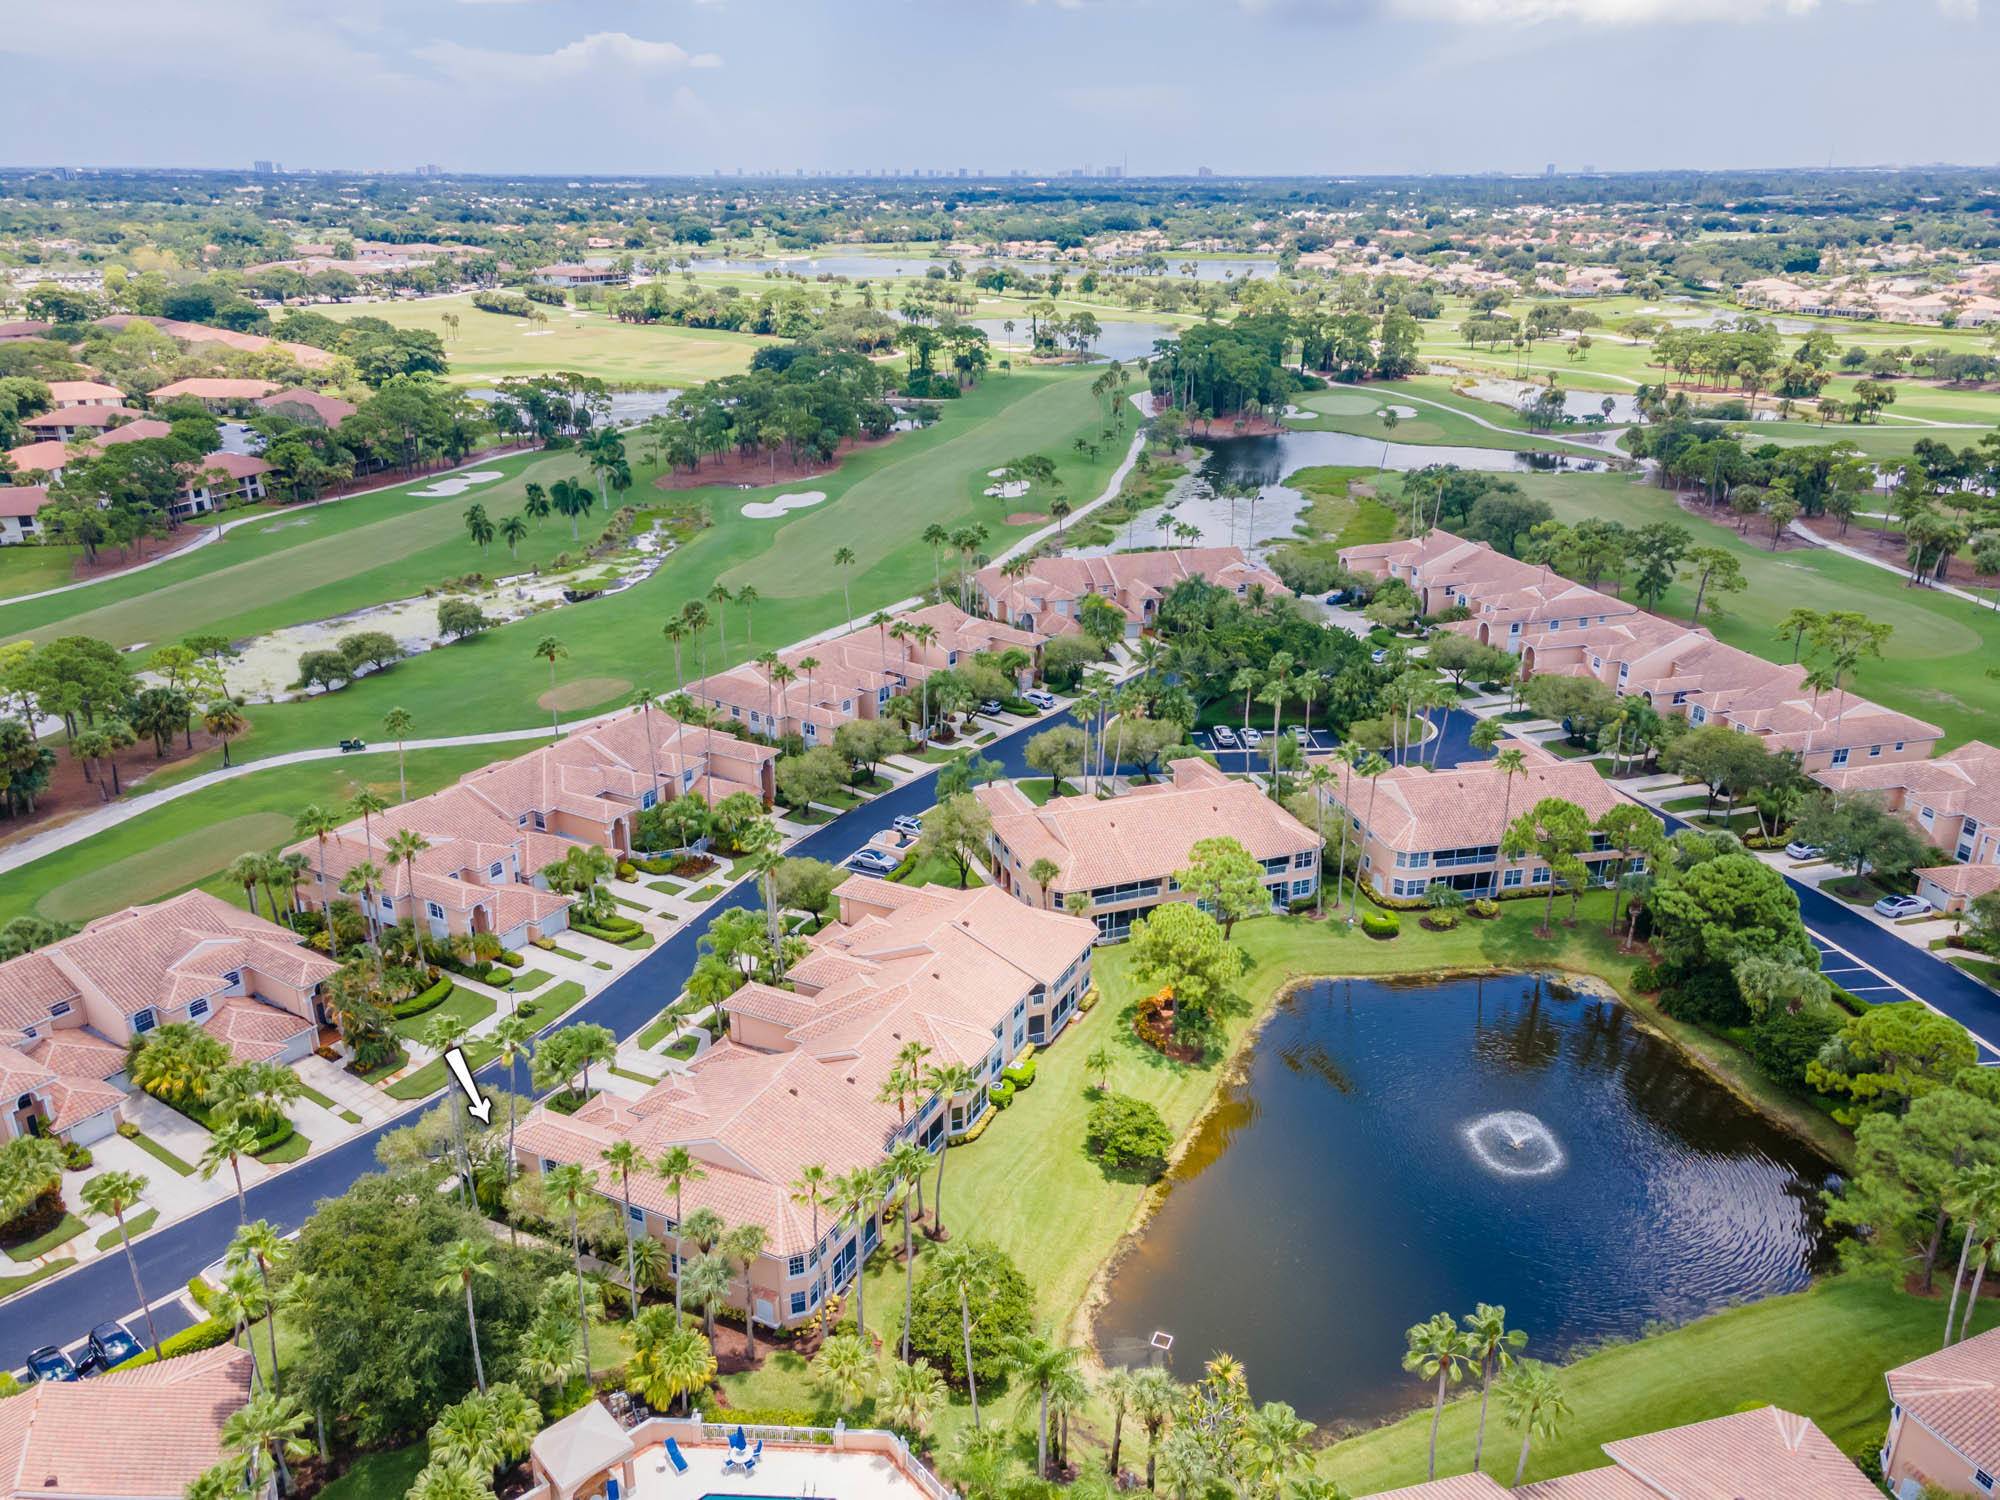 Enjoy beautiful lake views from one of the largest 3 bedroom condos in PGA National in the wonderful Legends community.